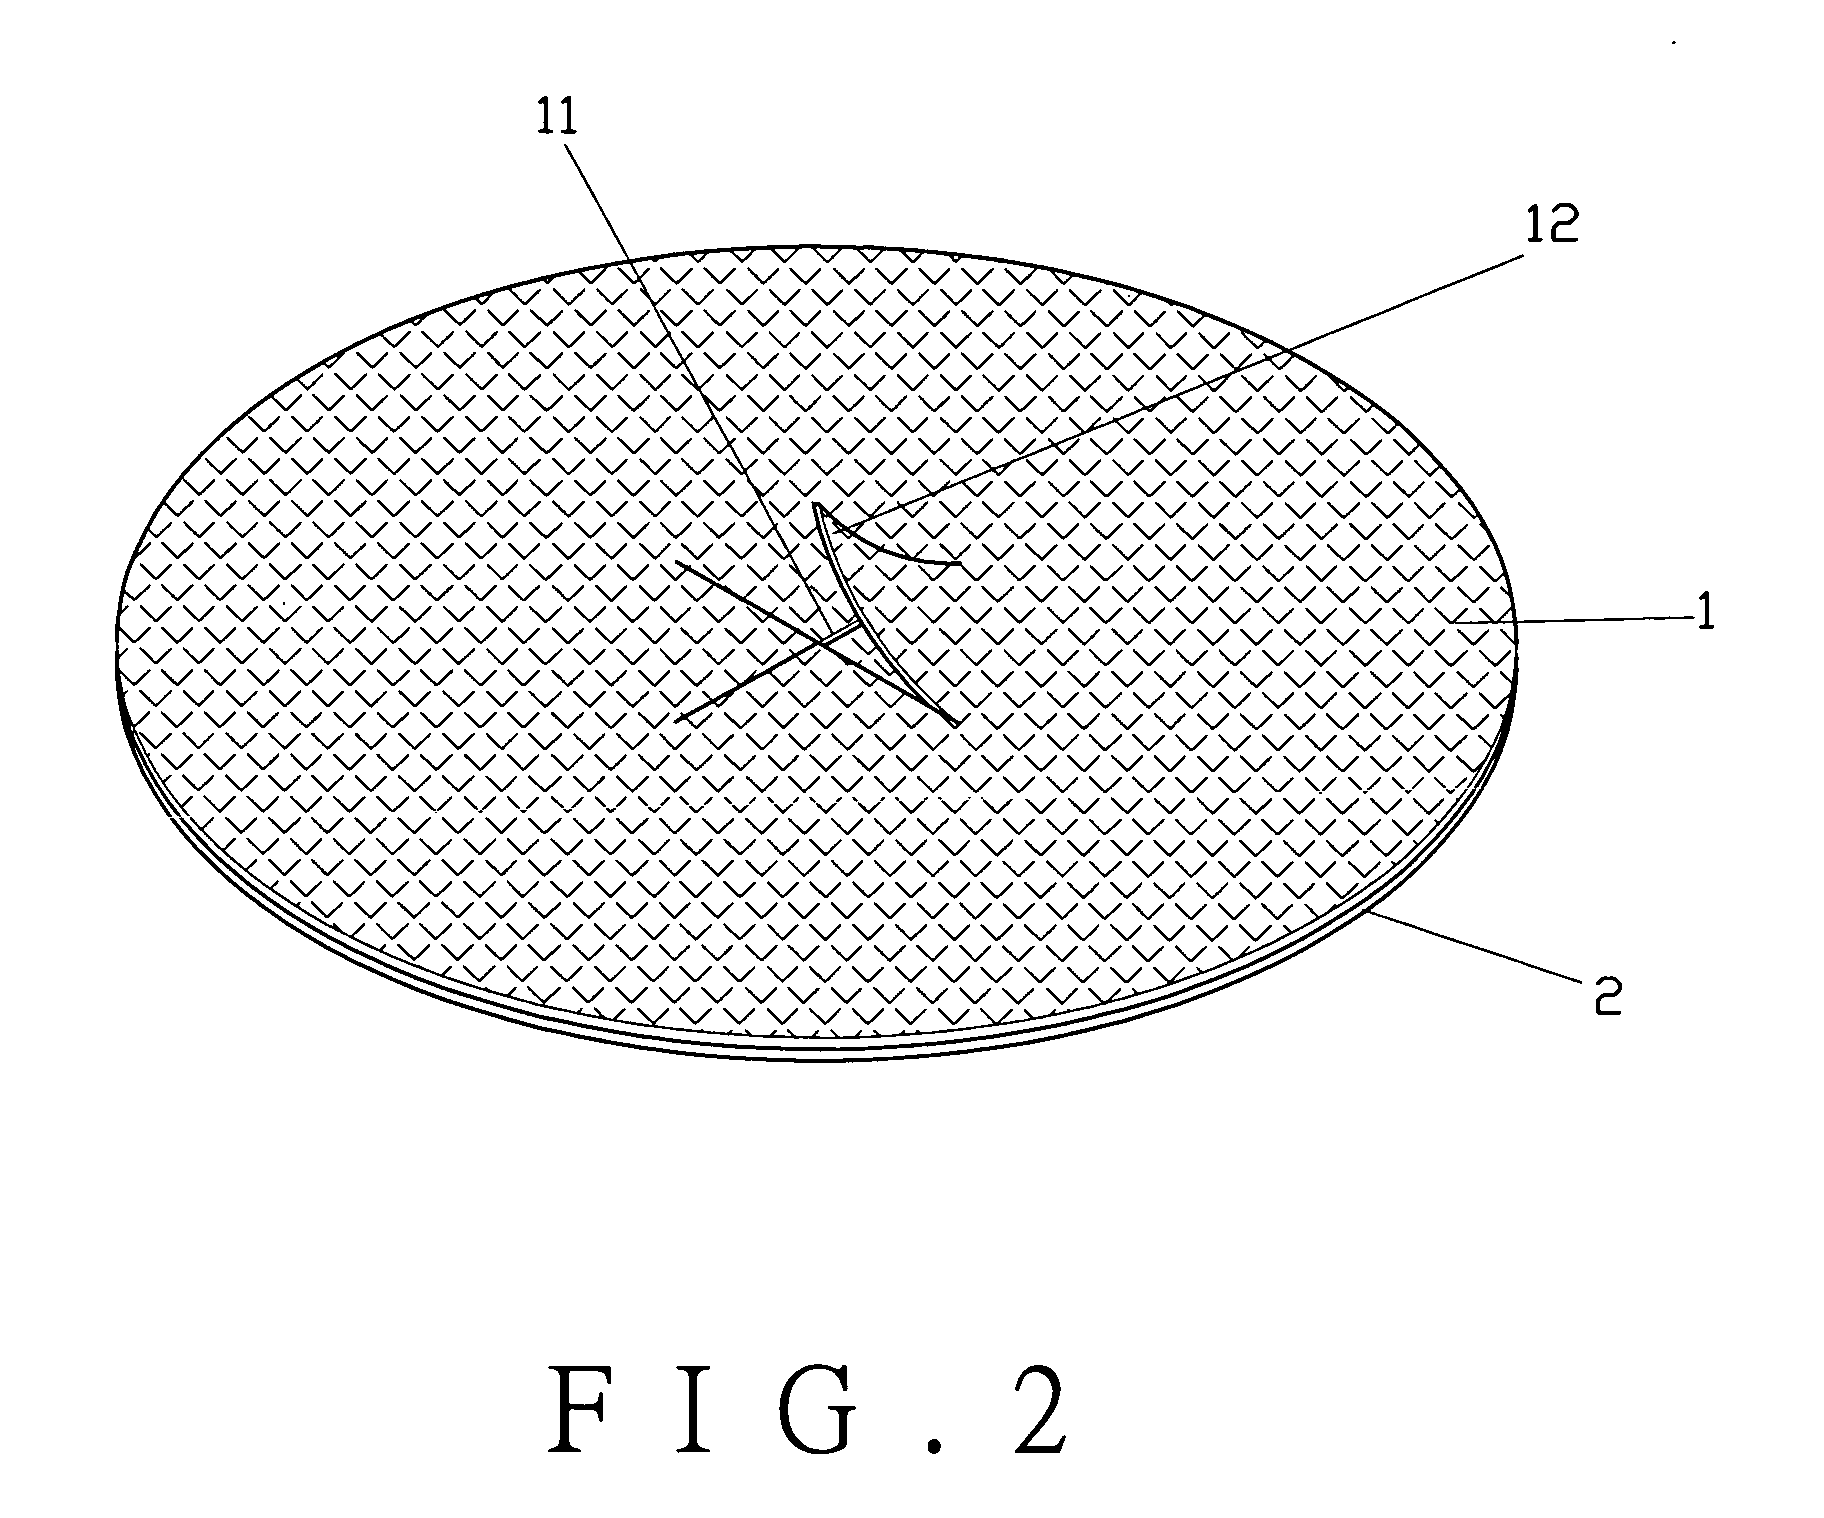 Bilayer patch device for hernia repair